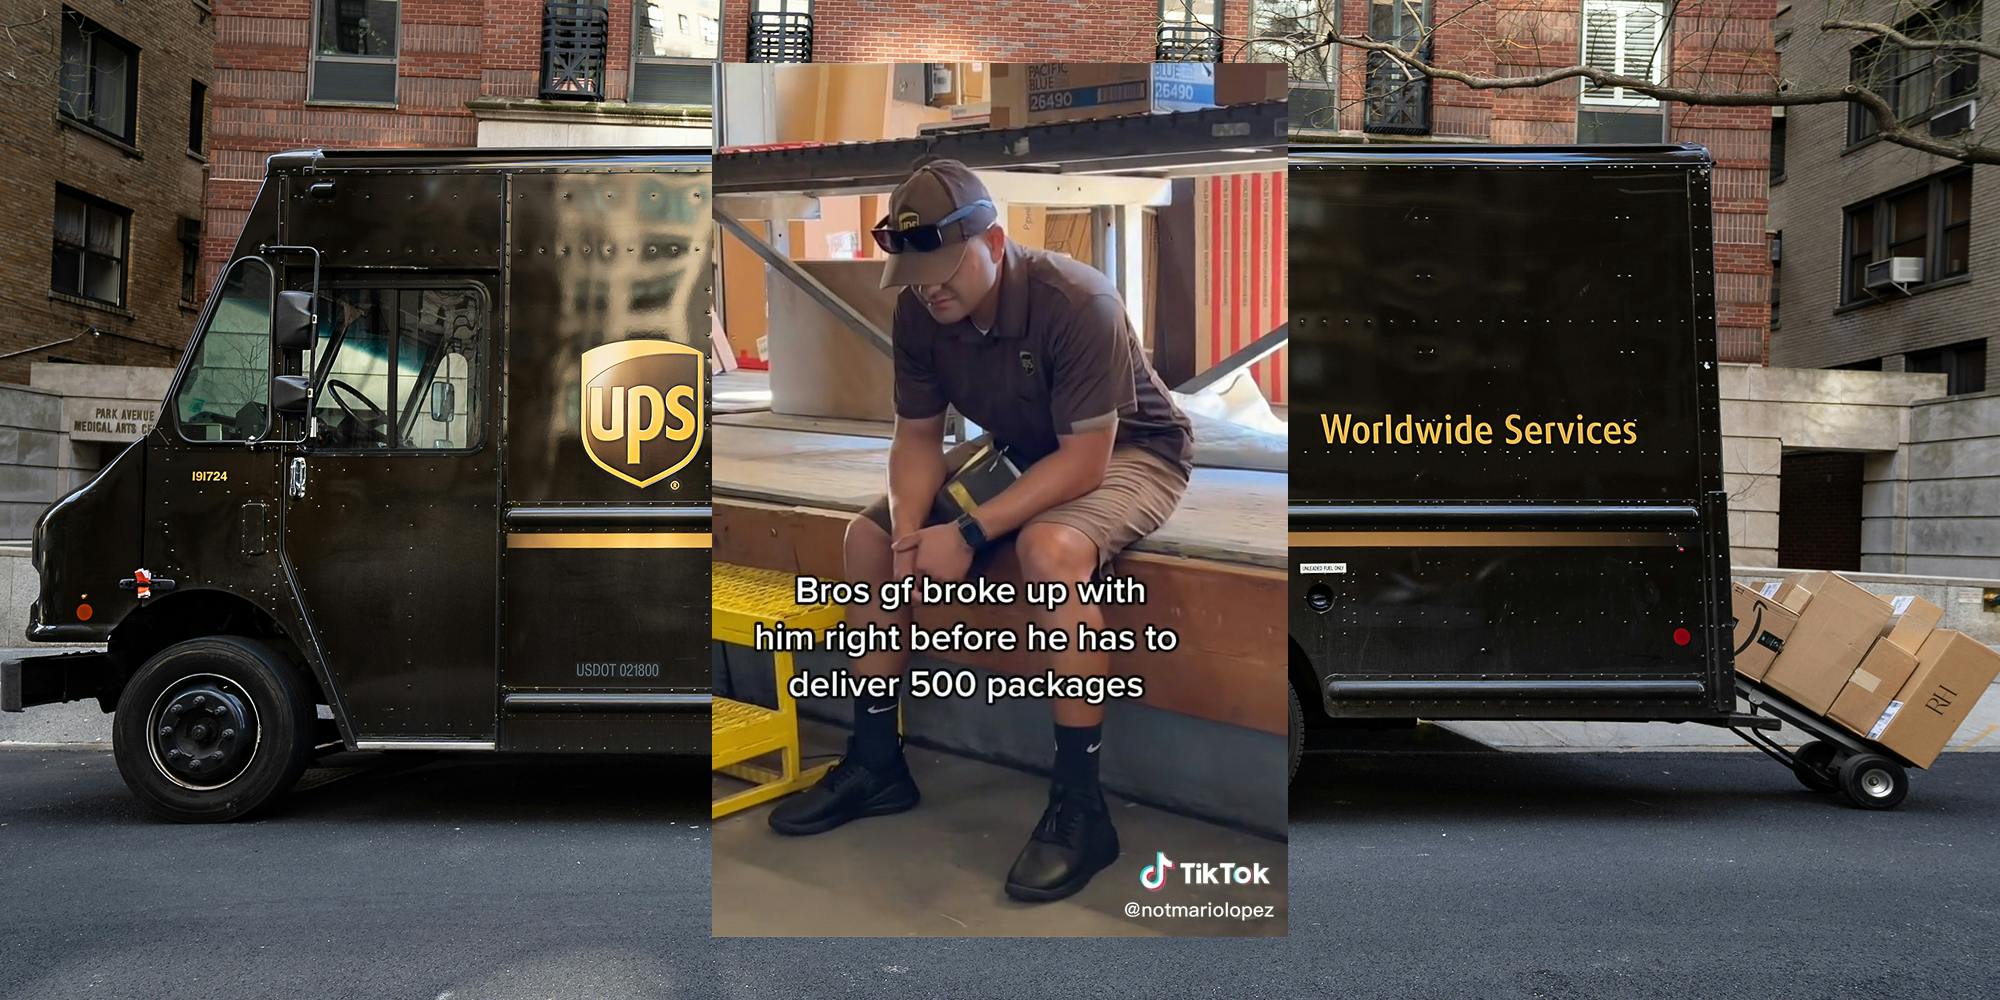 UPS truck (background) UPS employee sitting with caption "bros gf broke up with him right before he has to deliver 500 packages" (inset)